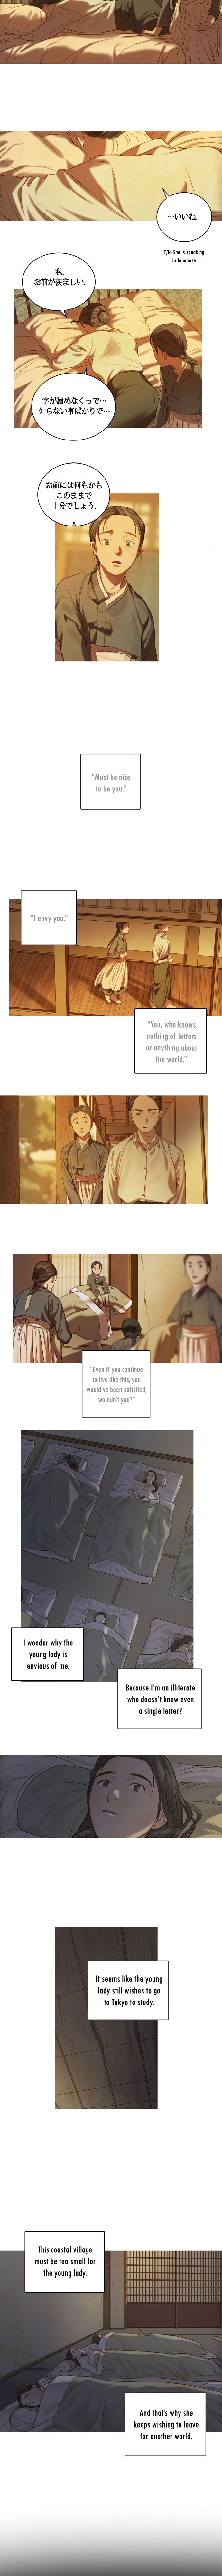 Gorae Byul - The Gyeongseong Mermaid - Chapter 2 Page 9